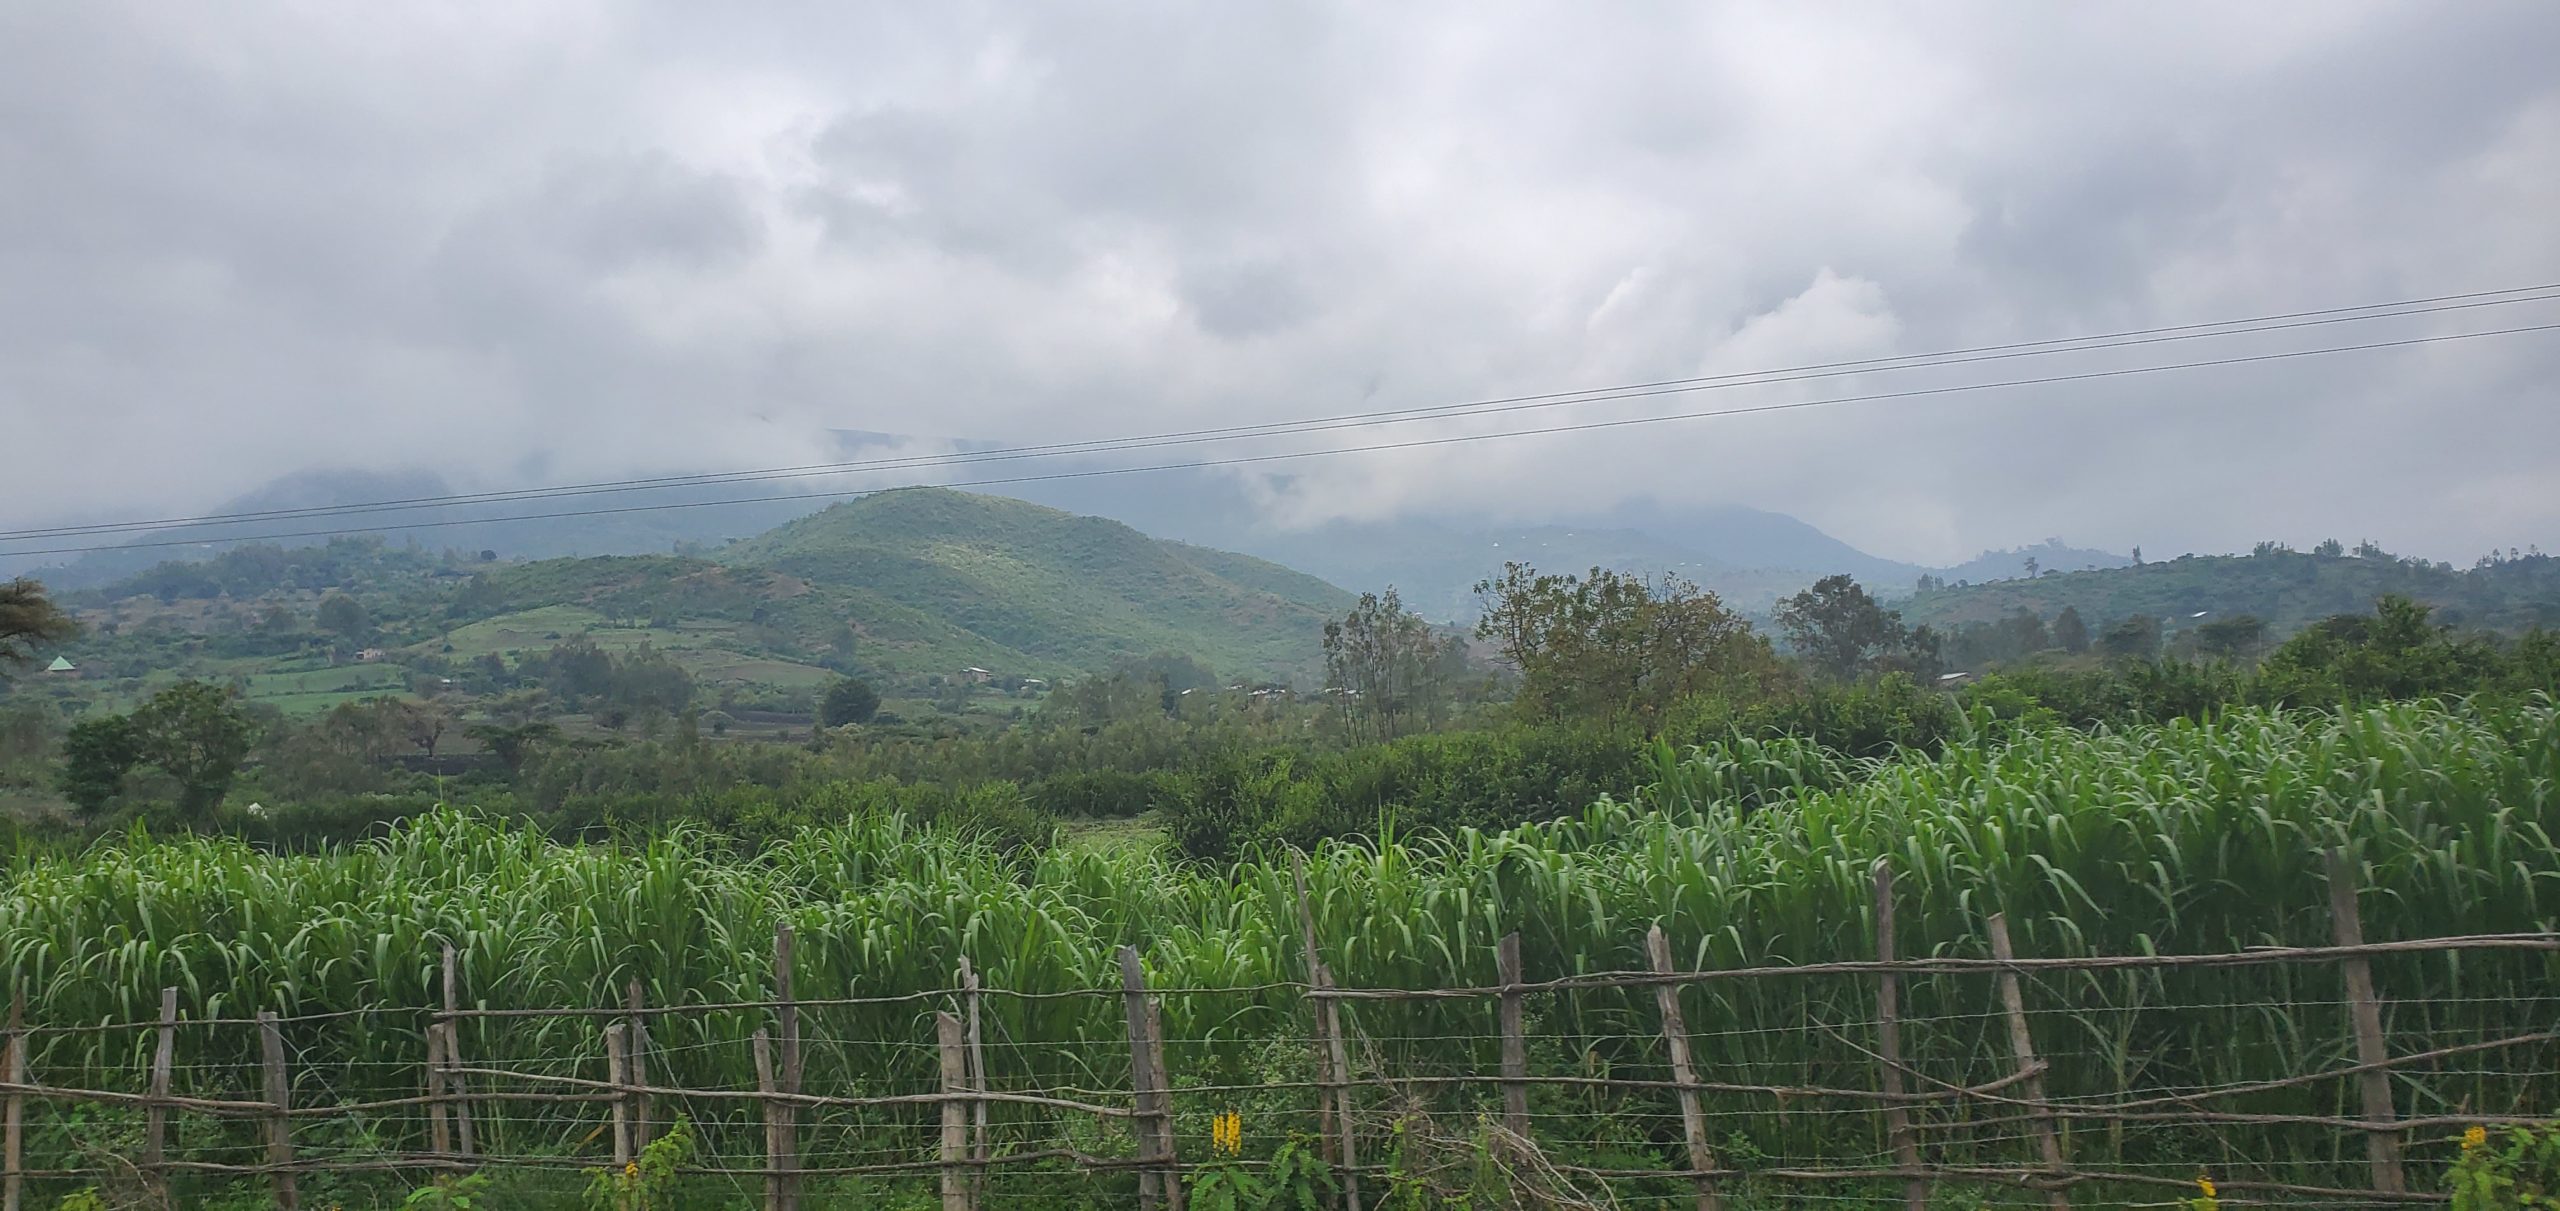 A field of green plants with mountains in the background and a wooden fence in the foreground